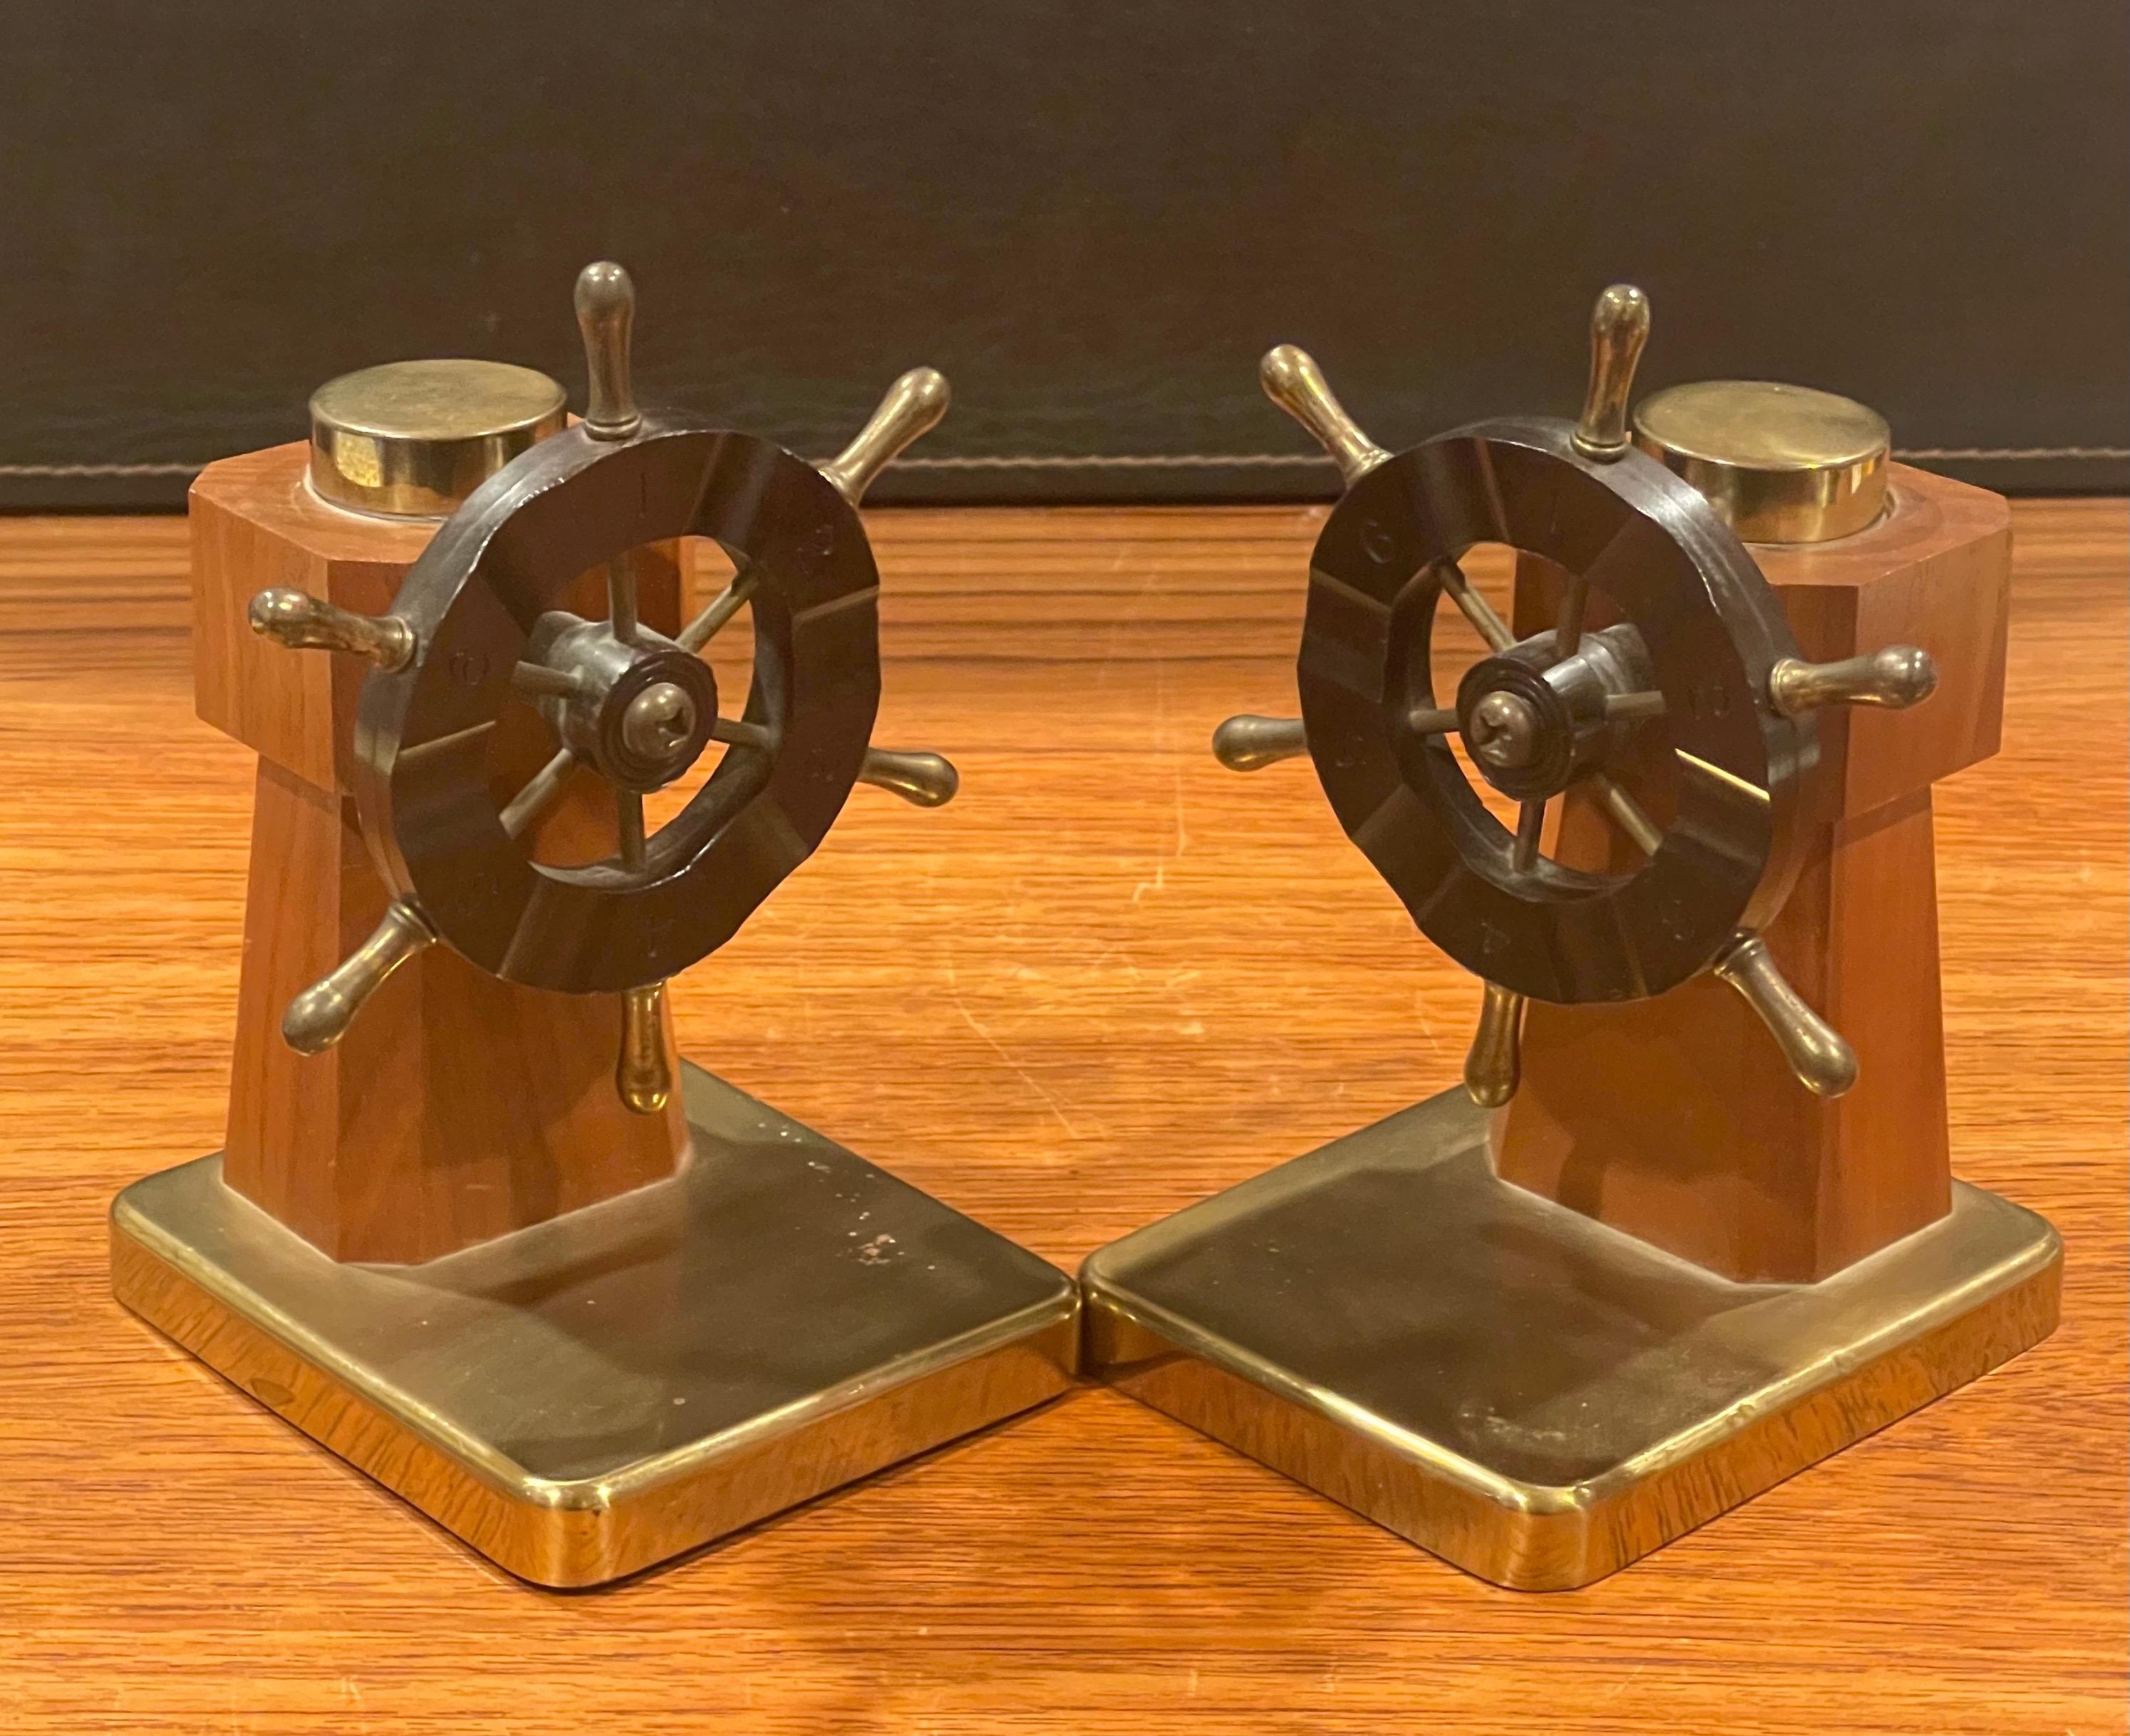 20th Century Pair of Art Deco Ship's Wheel Bookends by Walter Von Nessen for Chase & Co. For Sale